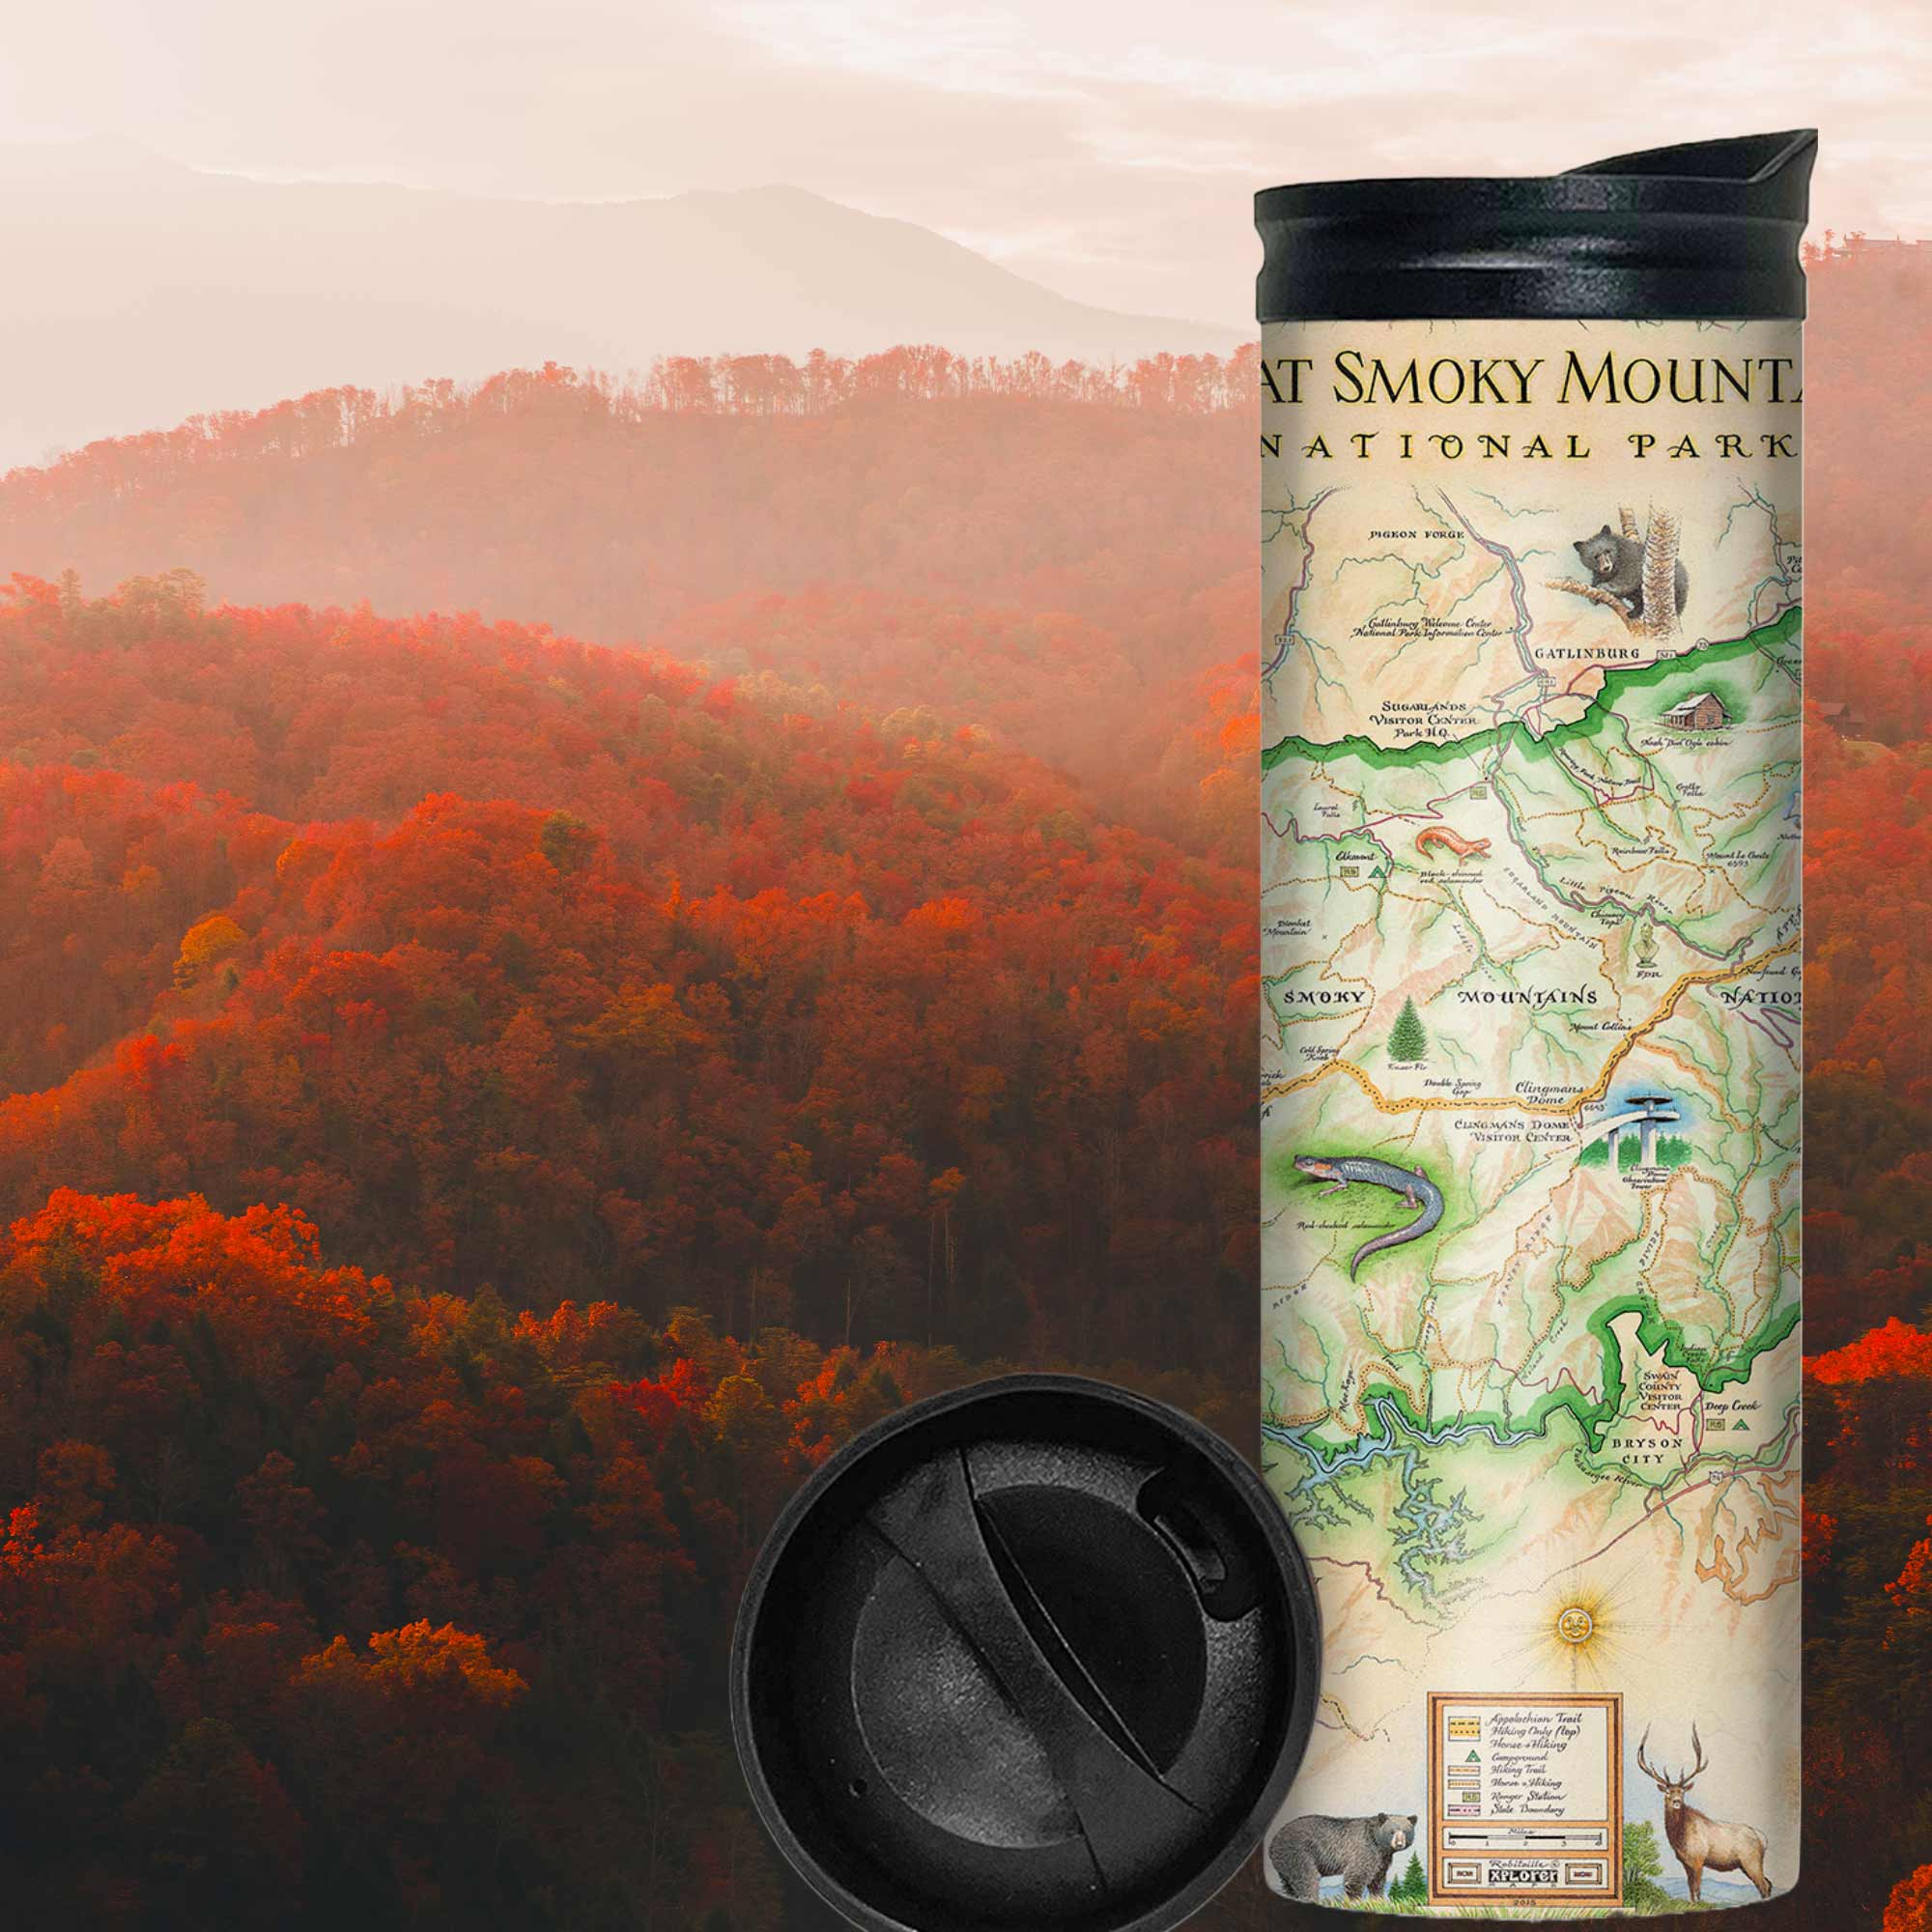 Great Smoky Mountains National Park Map travel drinkware with colorful red, orange, and green leaves on trees during sunset.  The map depicts the entire National Park on the border of North Carolina and Tennessee. It features illustrations of a salamander, woodpecker, Clingman's Dome, Sugarland's Visitor Center, and Oconoluftee Visitor Center. 